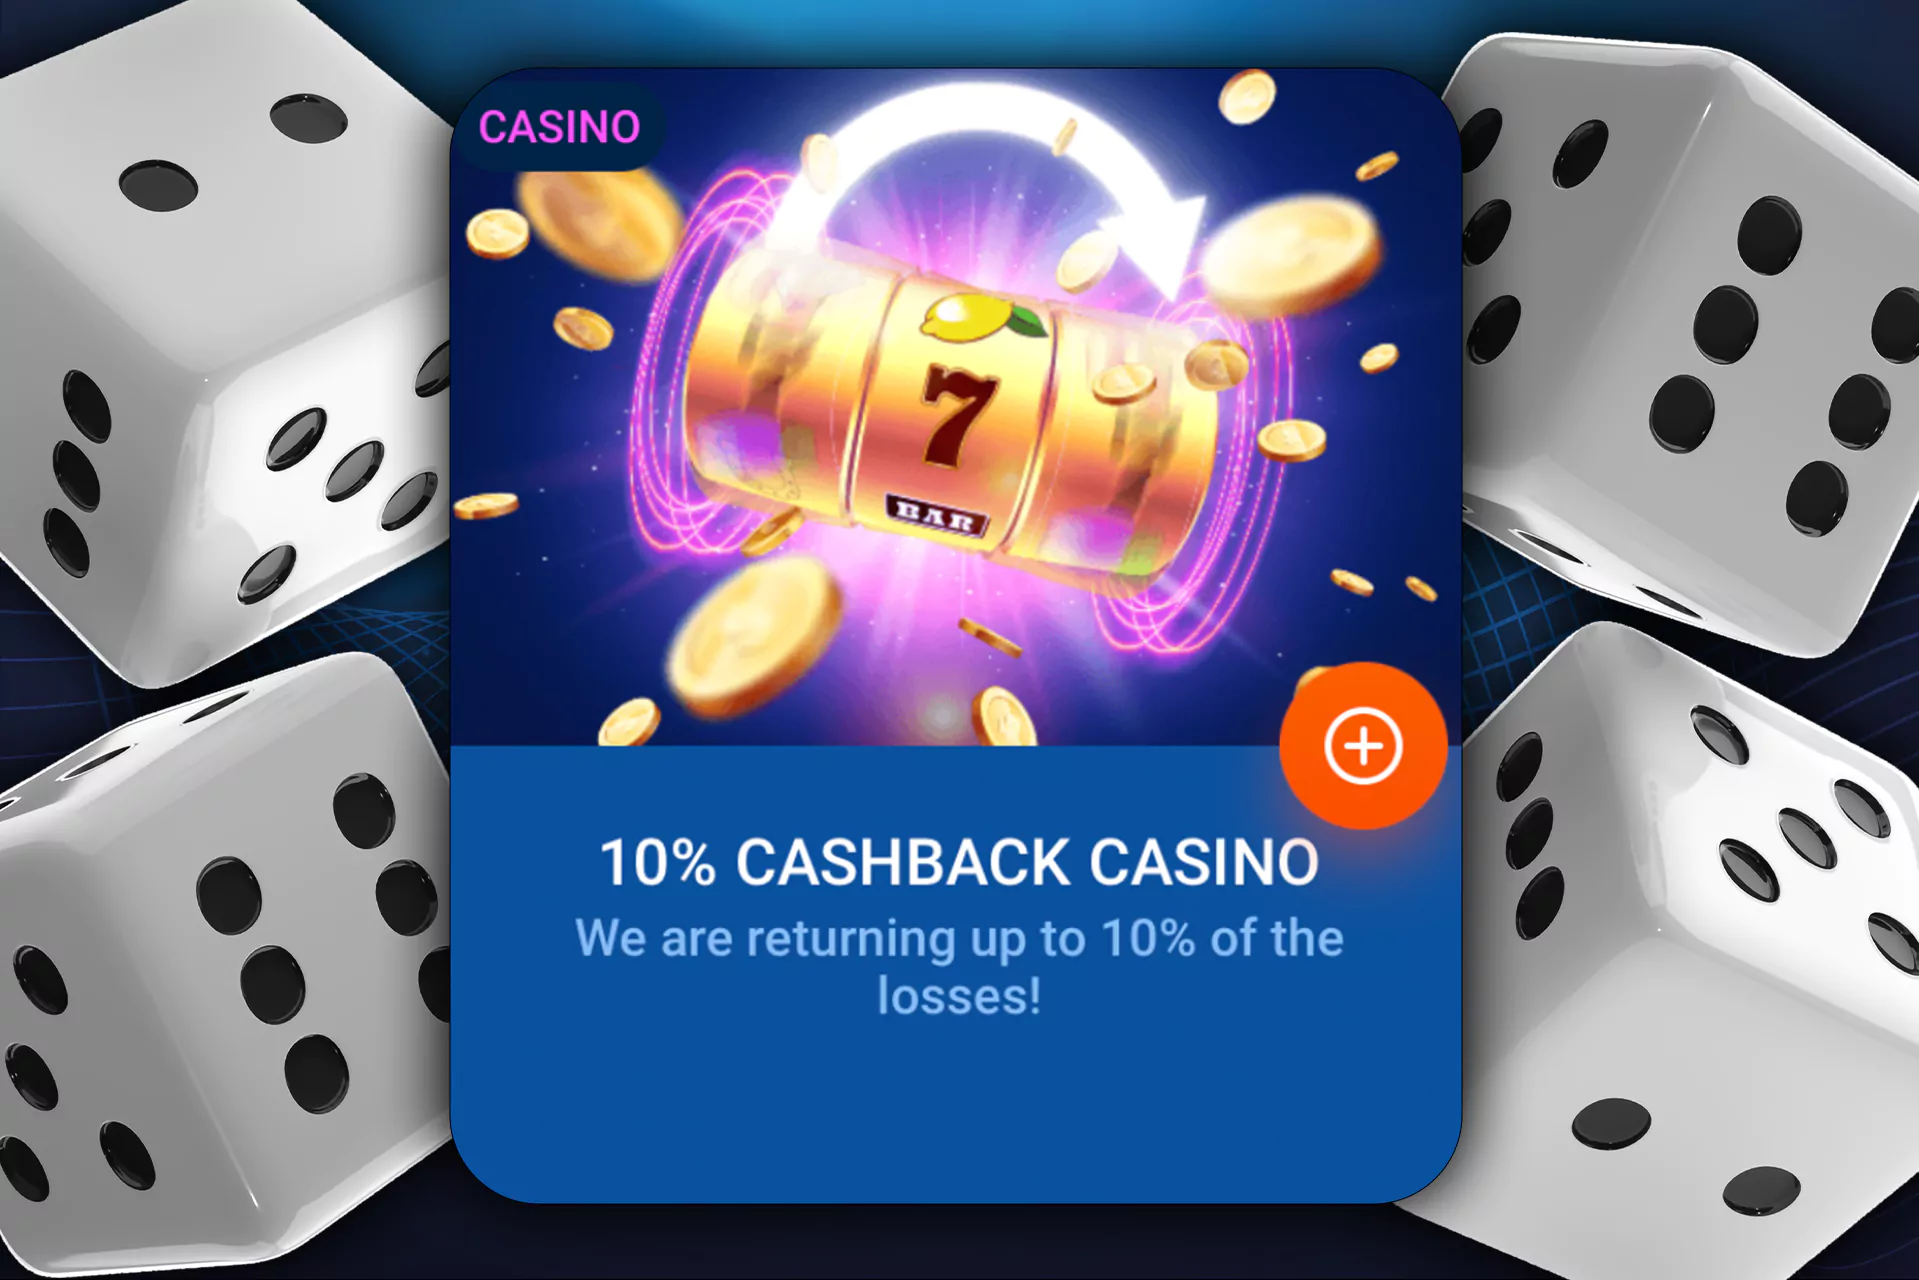 10% cashback casino: we are returning up to 10% of the losses.